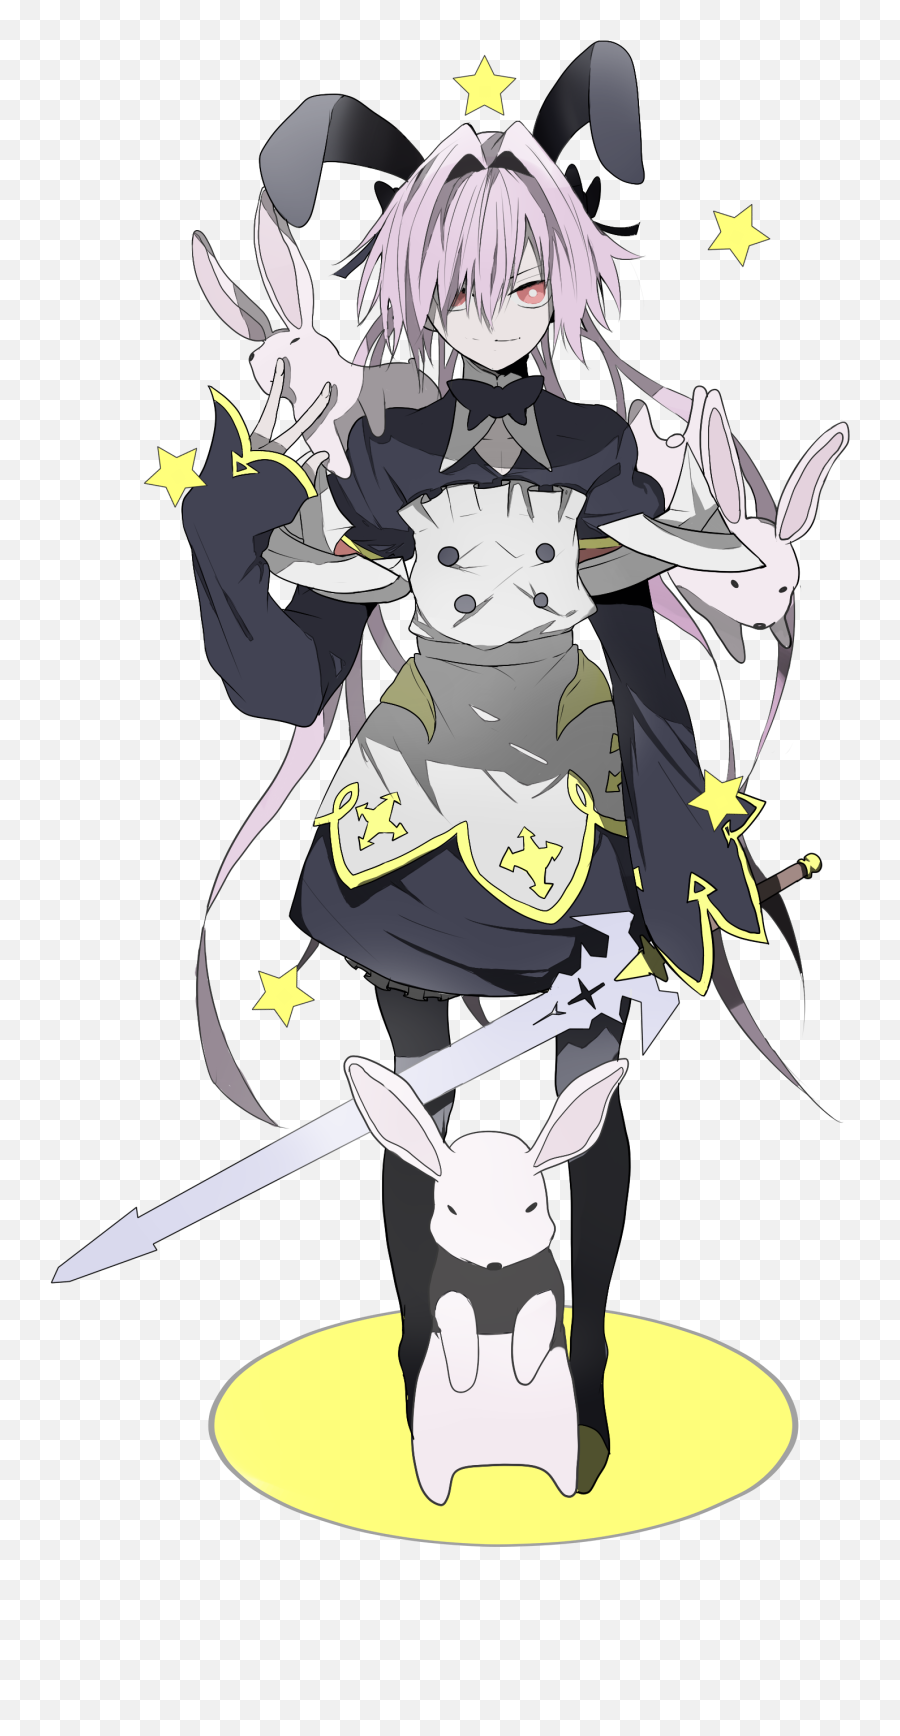 Astolfo And 1 More Png Transparent